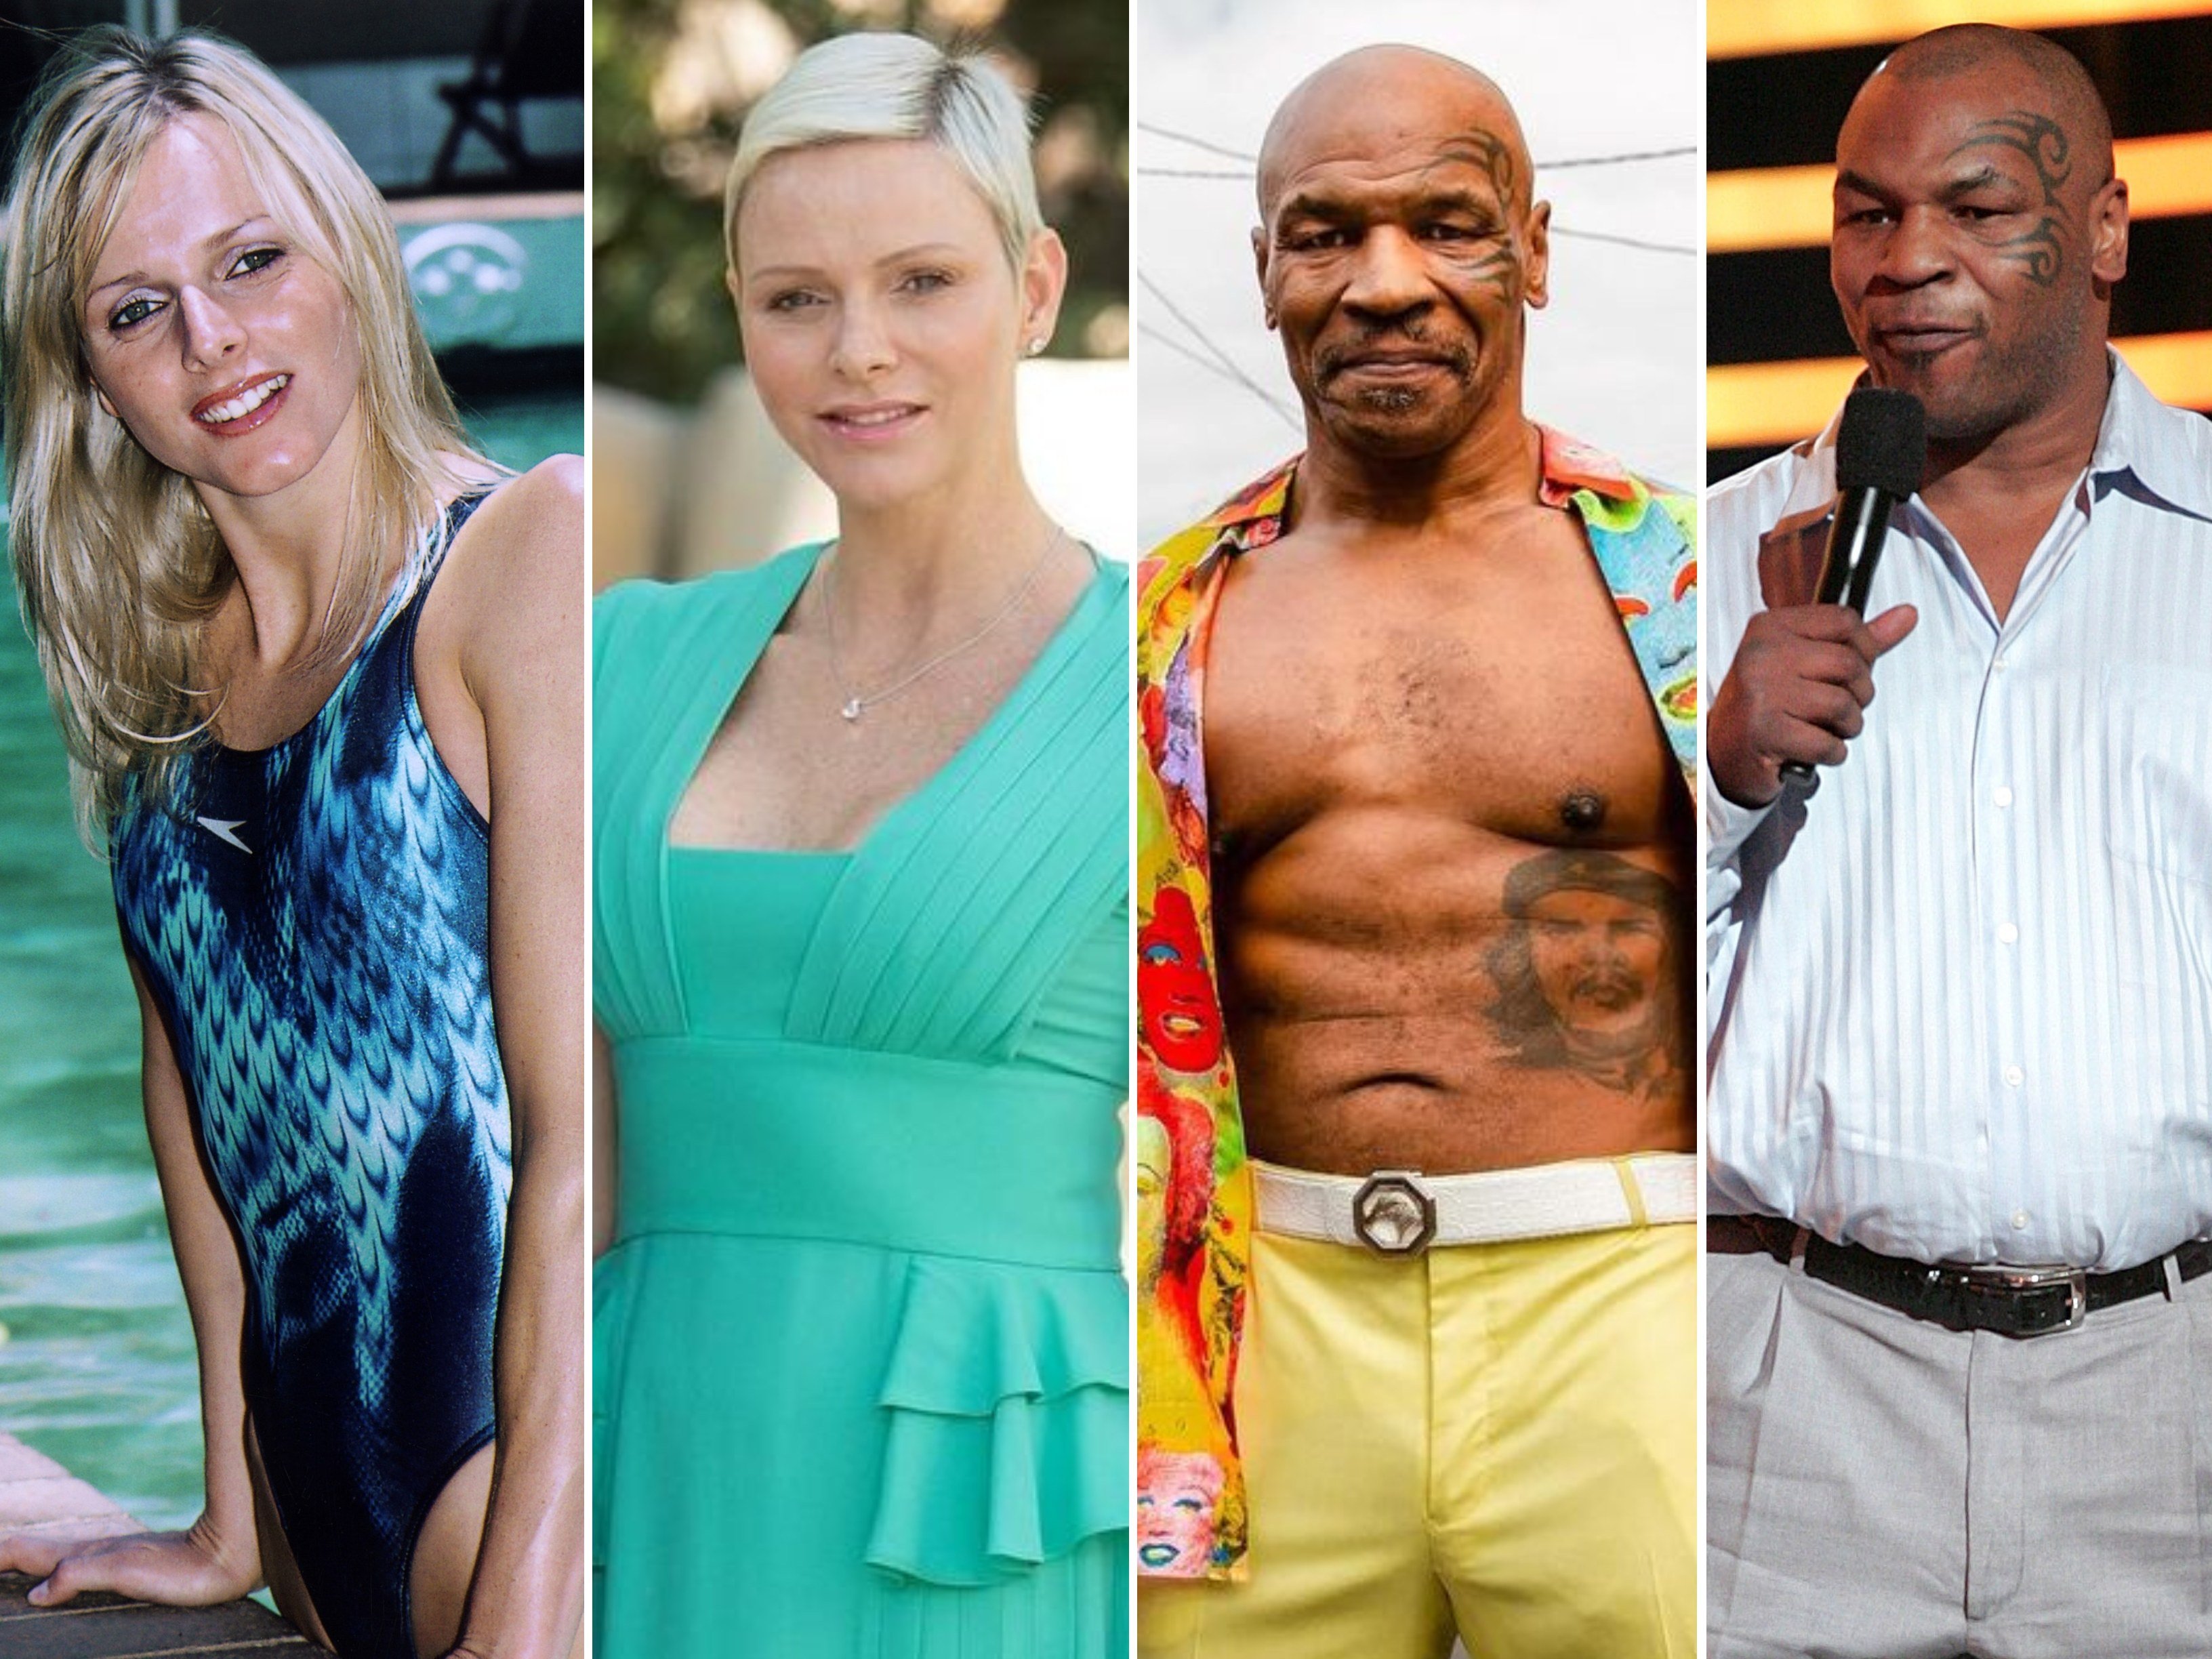 Princess Charlene of Monaco and Mike Tyson look quite different after their retirements. Photos: @palaisprincierdemonaco, @miketyson/Instagram, Getty Images